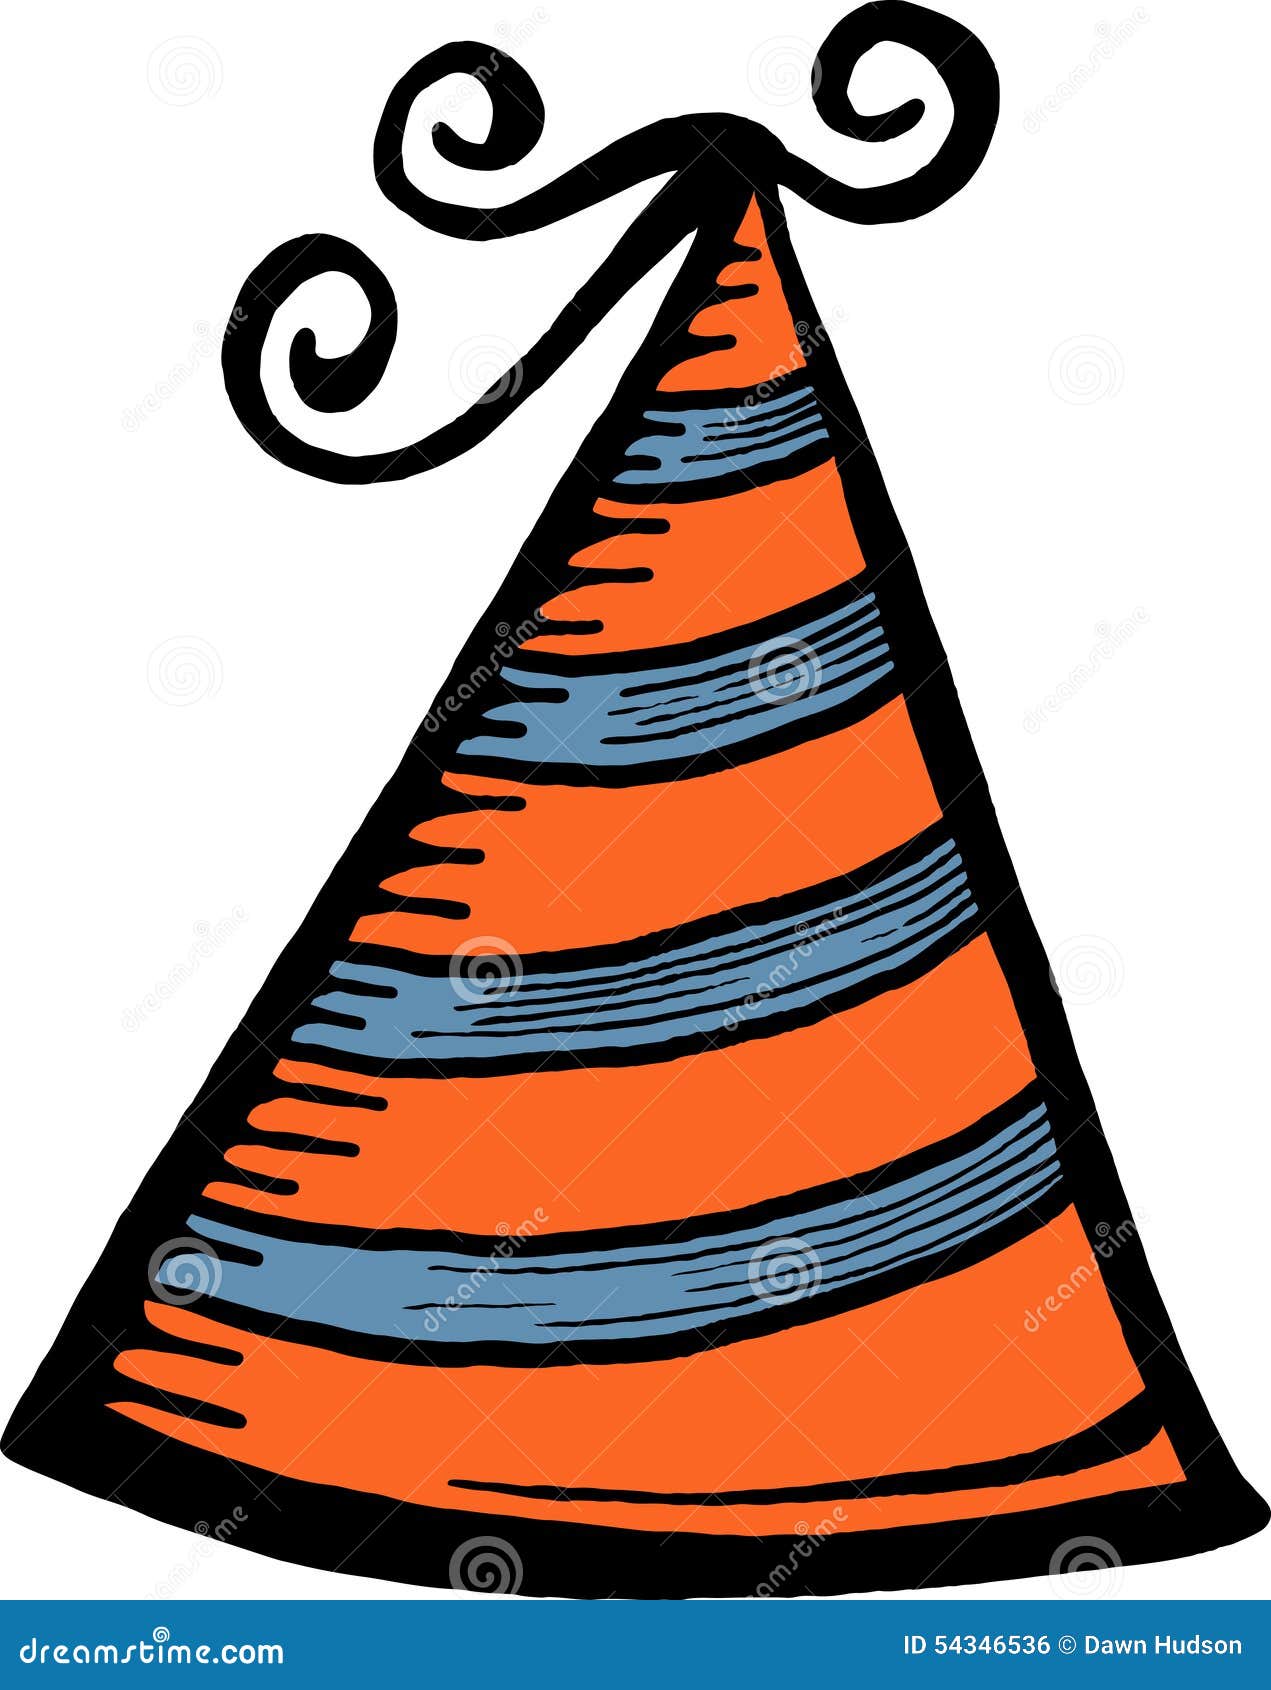 Party Hat Stock Illustration - Image: 54346536